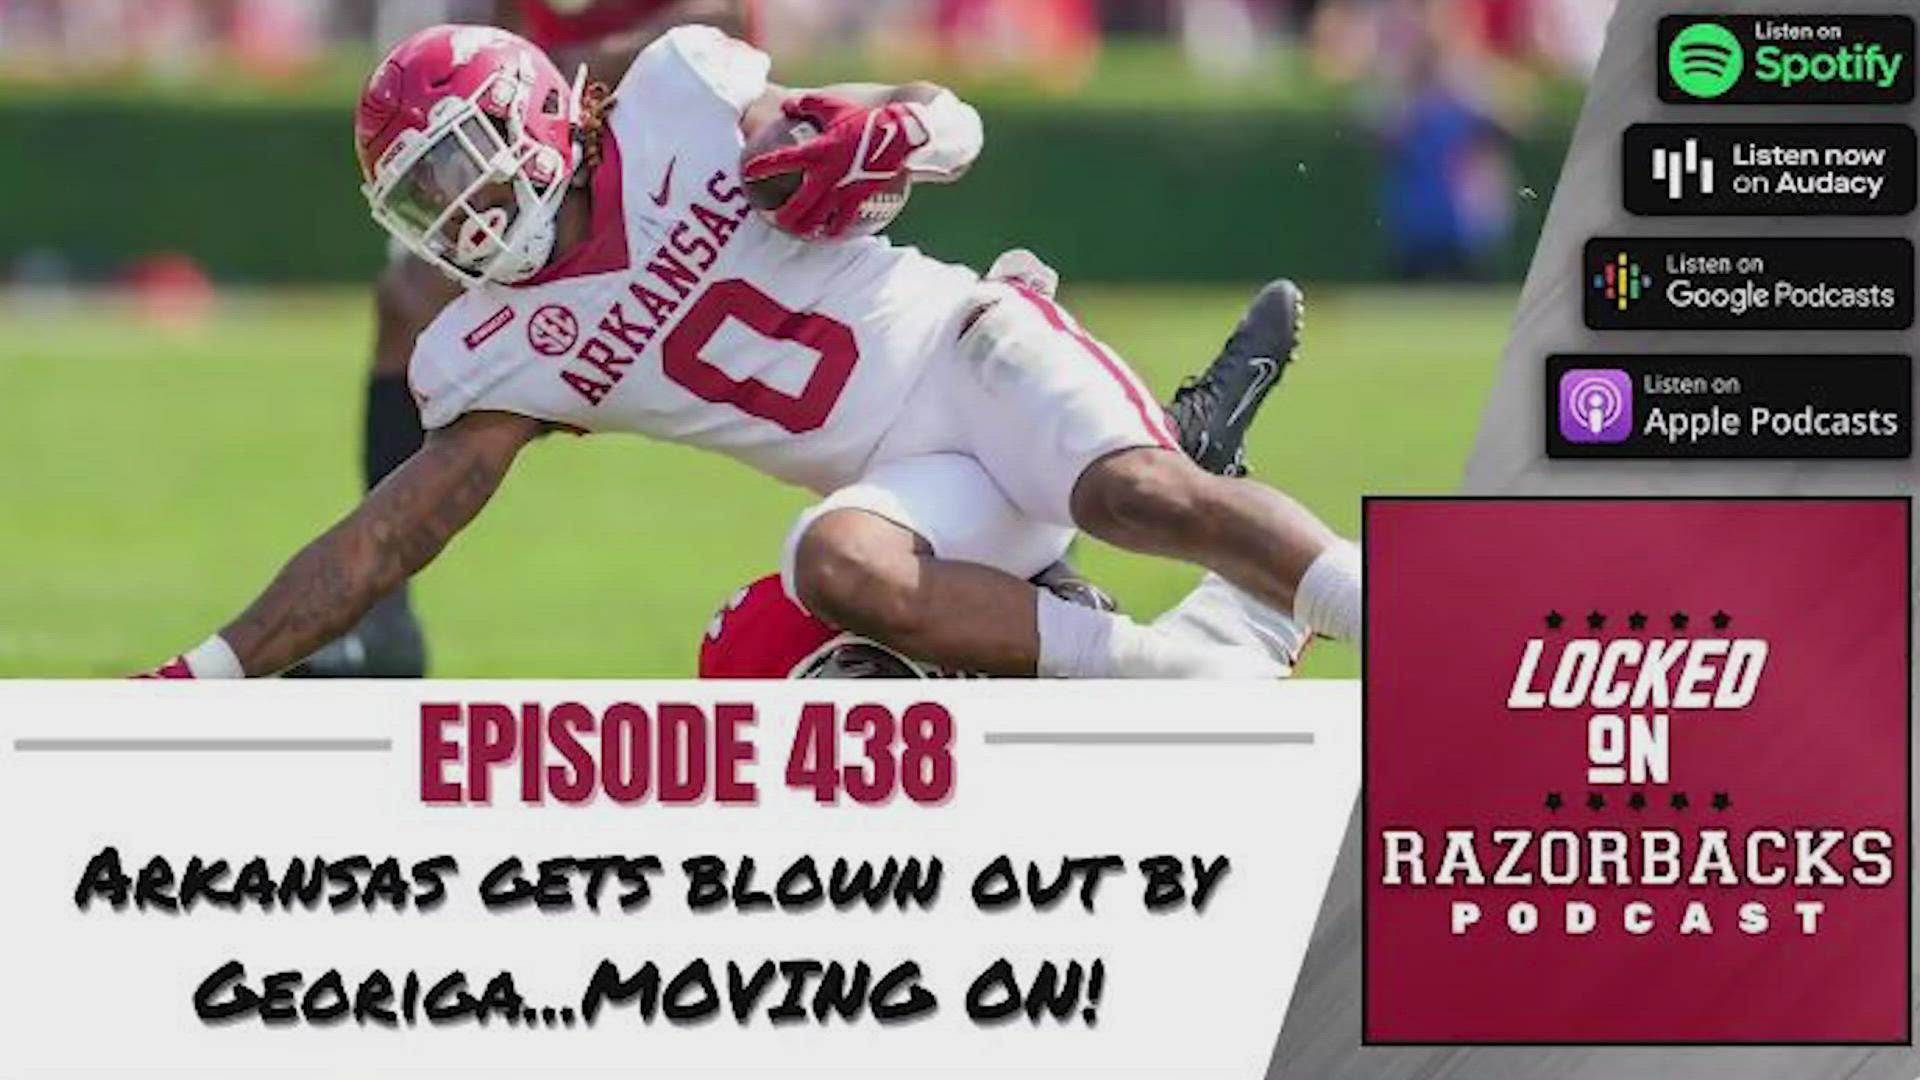 Locked On Razorback podcast host John Nabors is figuring out how Sam Pittman will have the Hogs ready to beat Ole Miss.